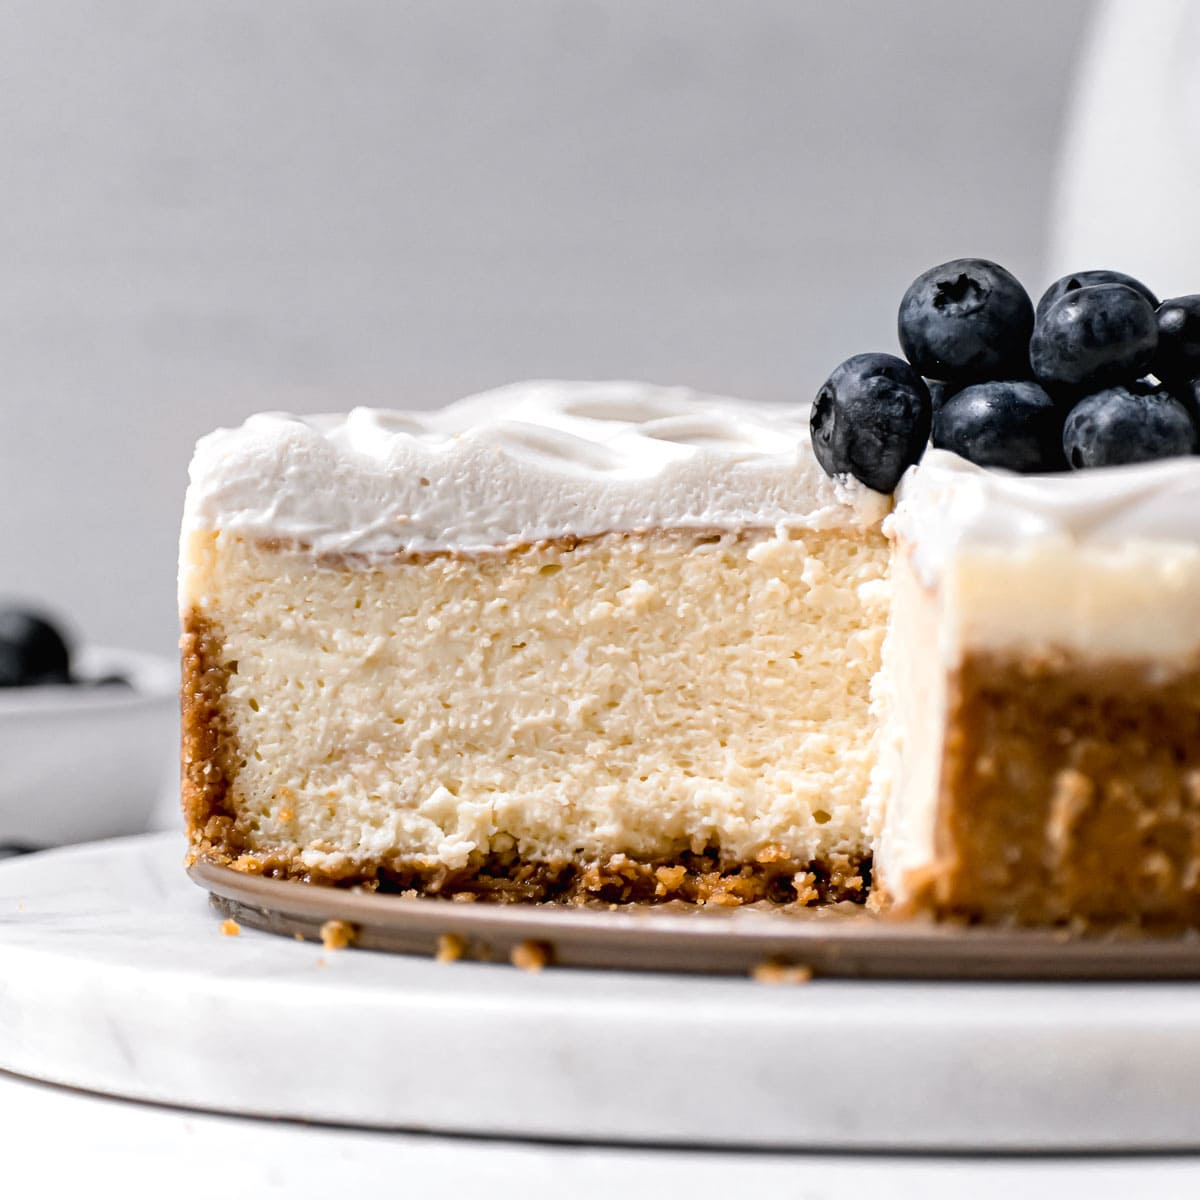 Sour Cream Cheesecake side view with slice removed